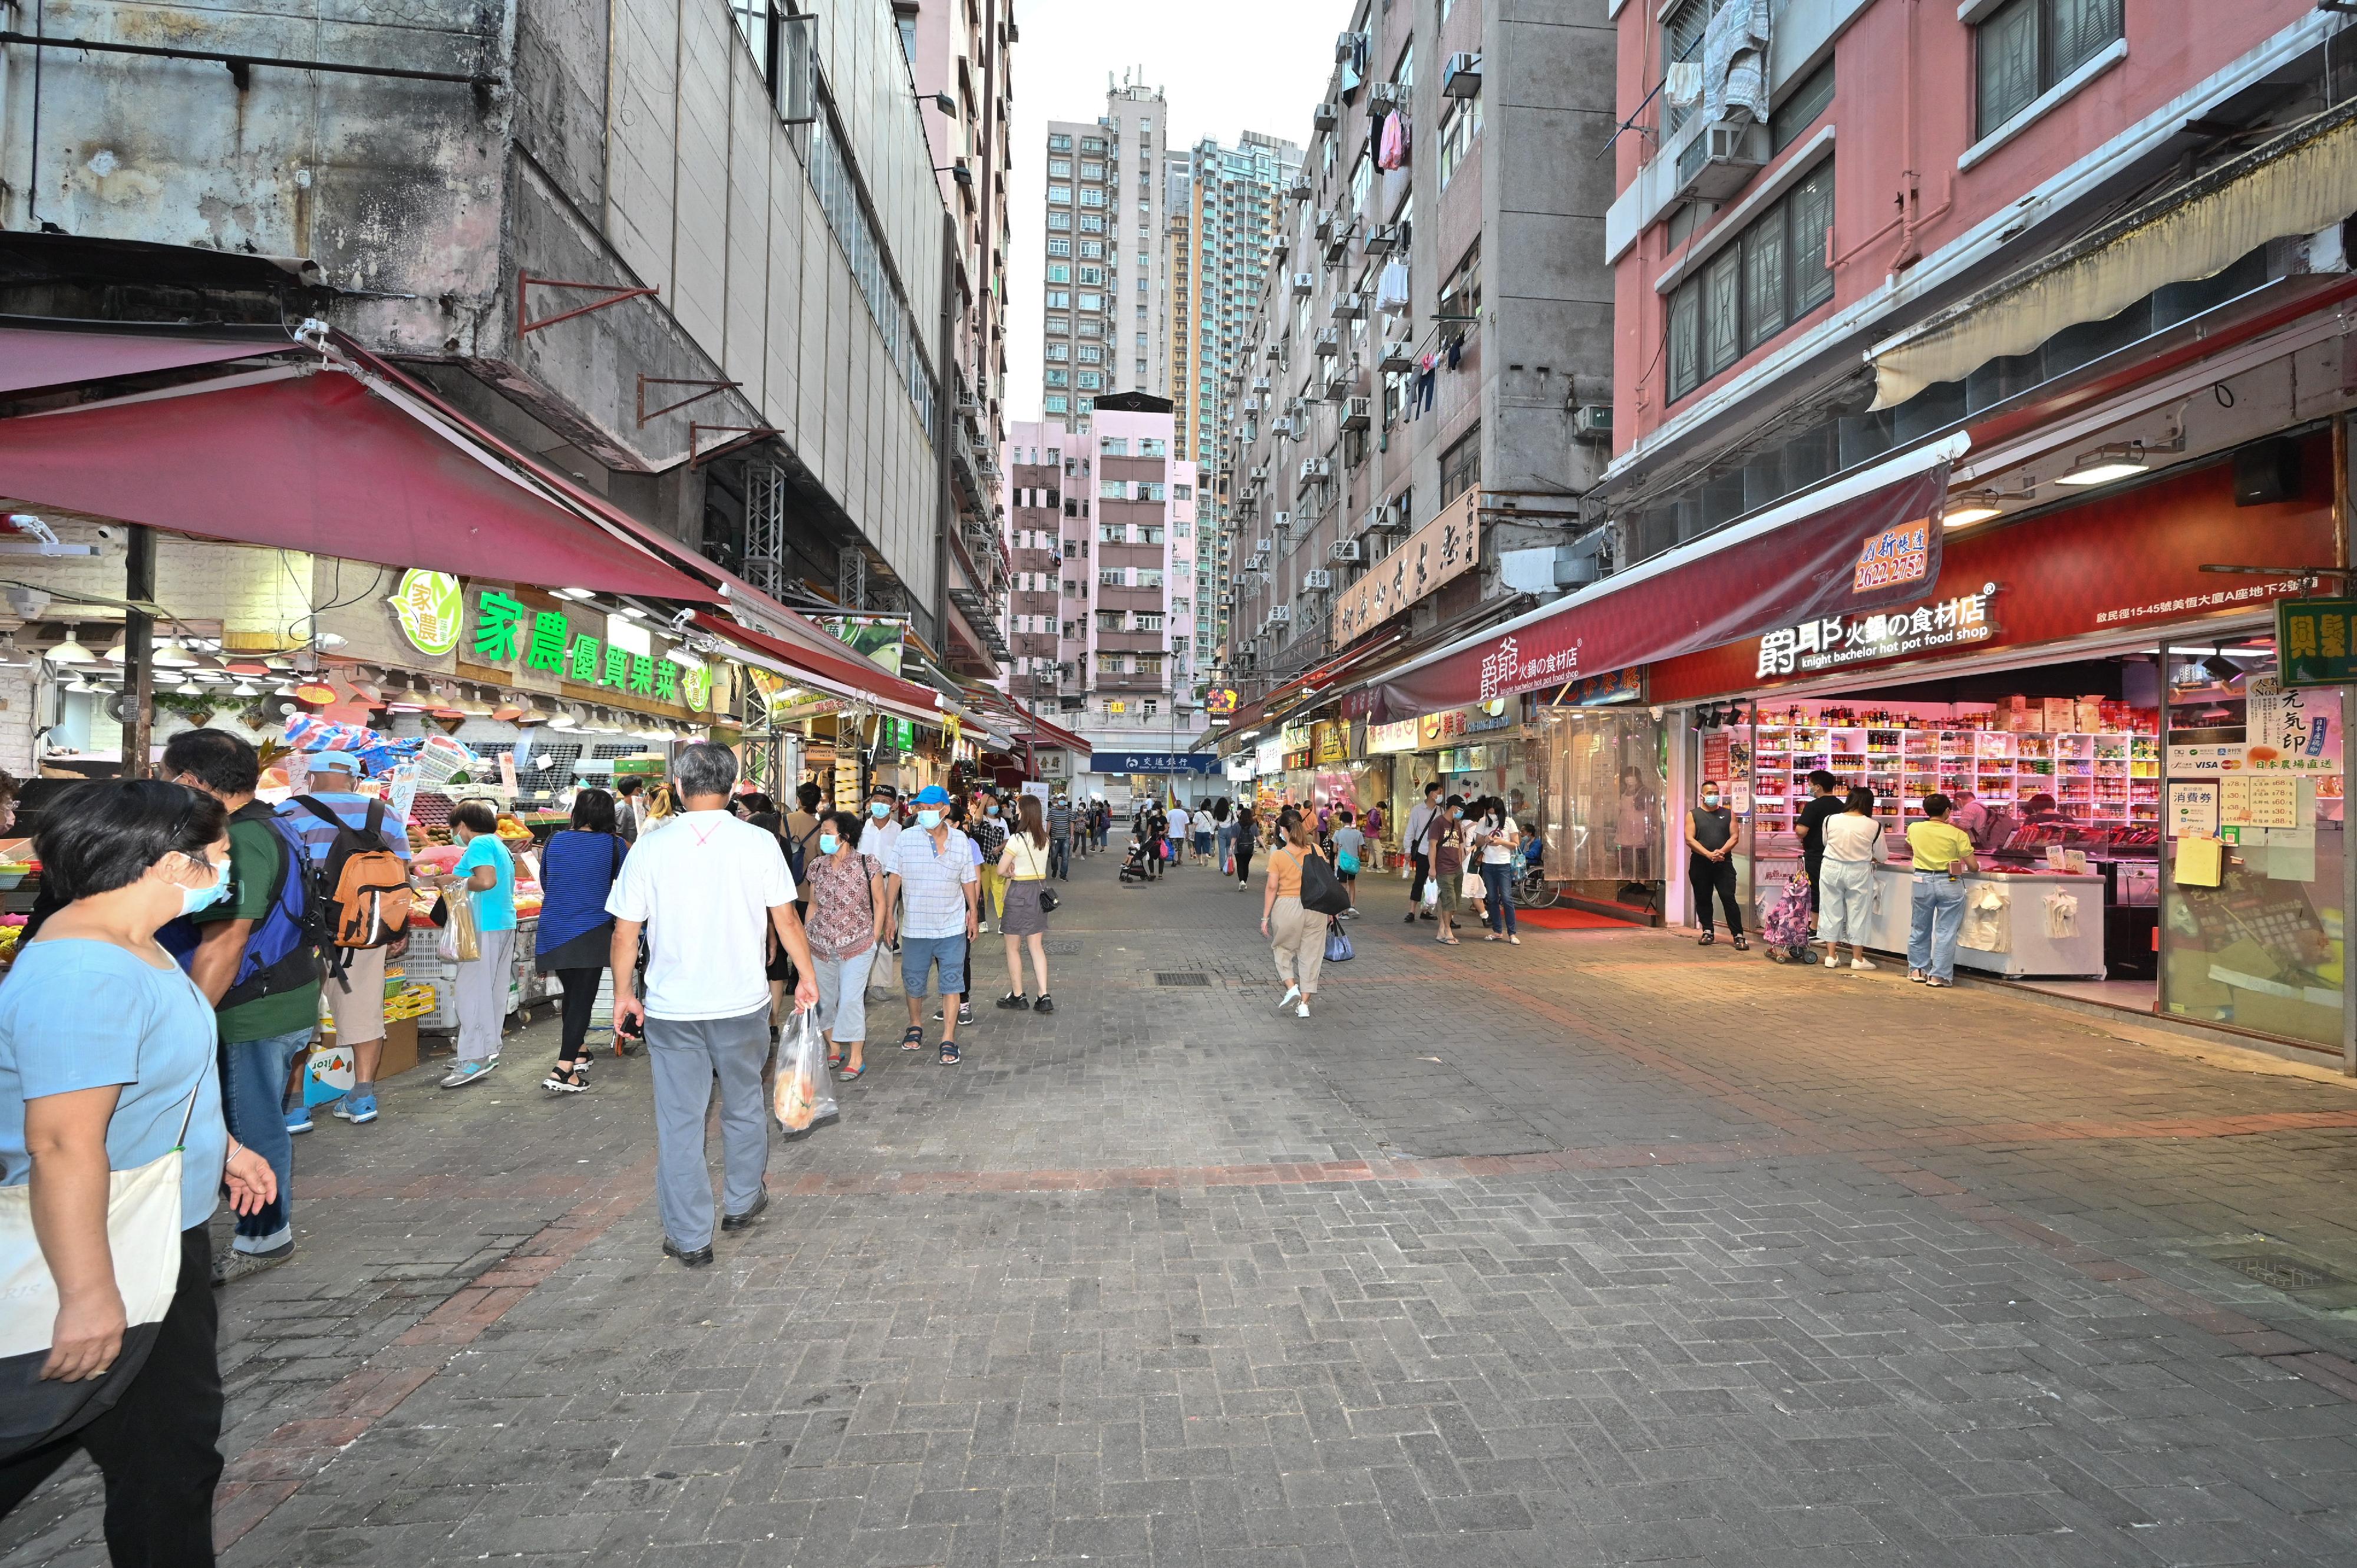 A spokesman for the Food and Environmental Hygiene Department (FEHD) said today (October 17) that the FEHD and the Hong Kong Police Force have conducted a series of stringent enforcement actions against illegal shop front extension activities in various districts since October 3. Photo shows the condition of a street in Tuen Mun District after a joint operation.